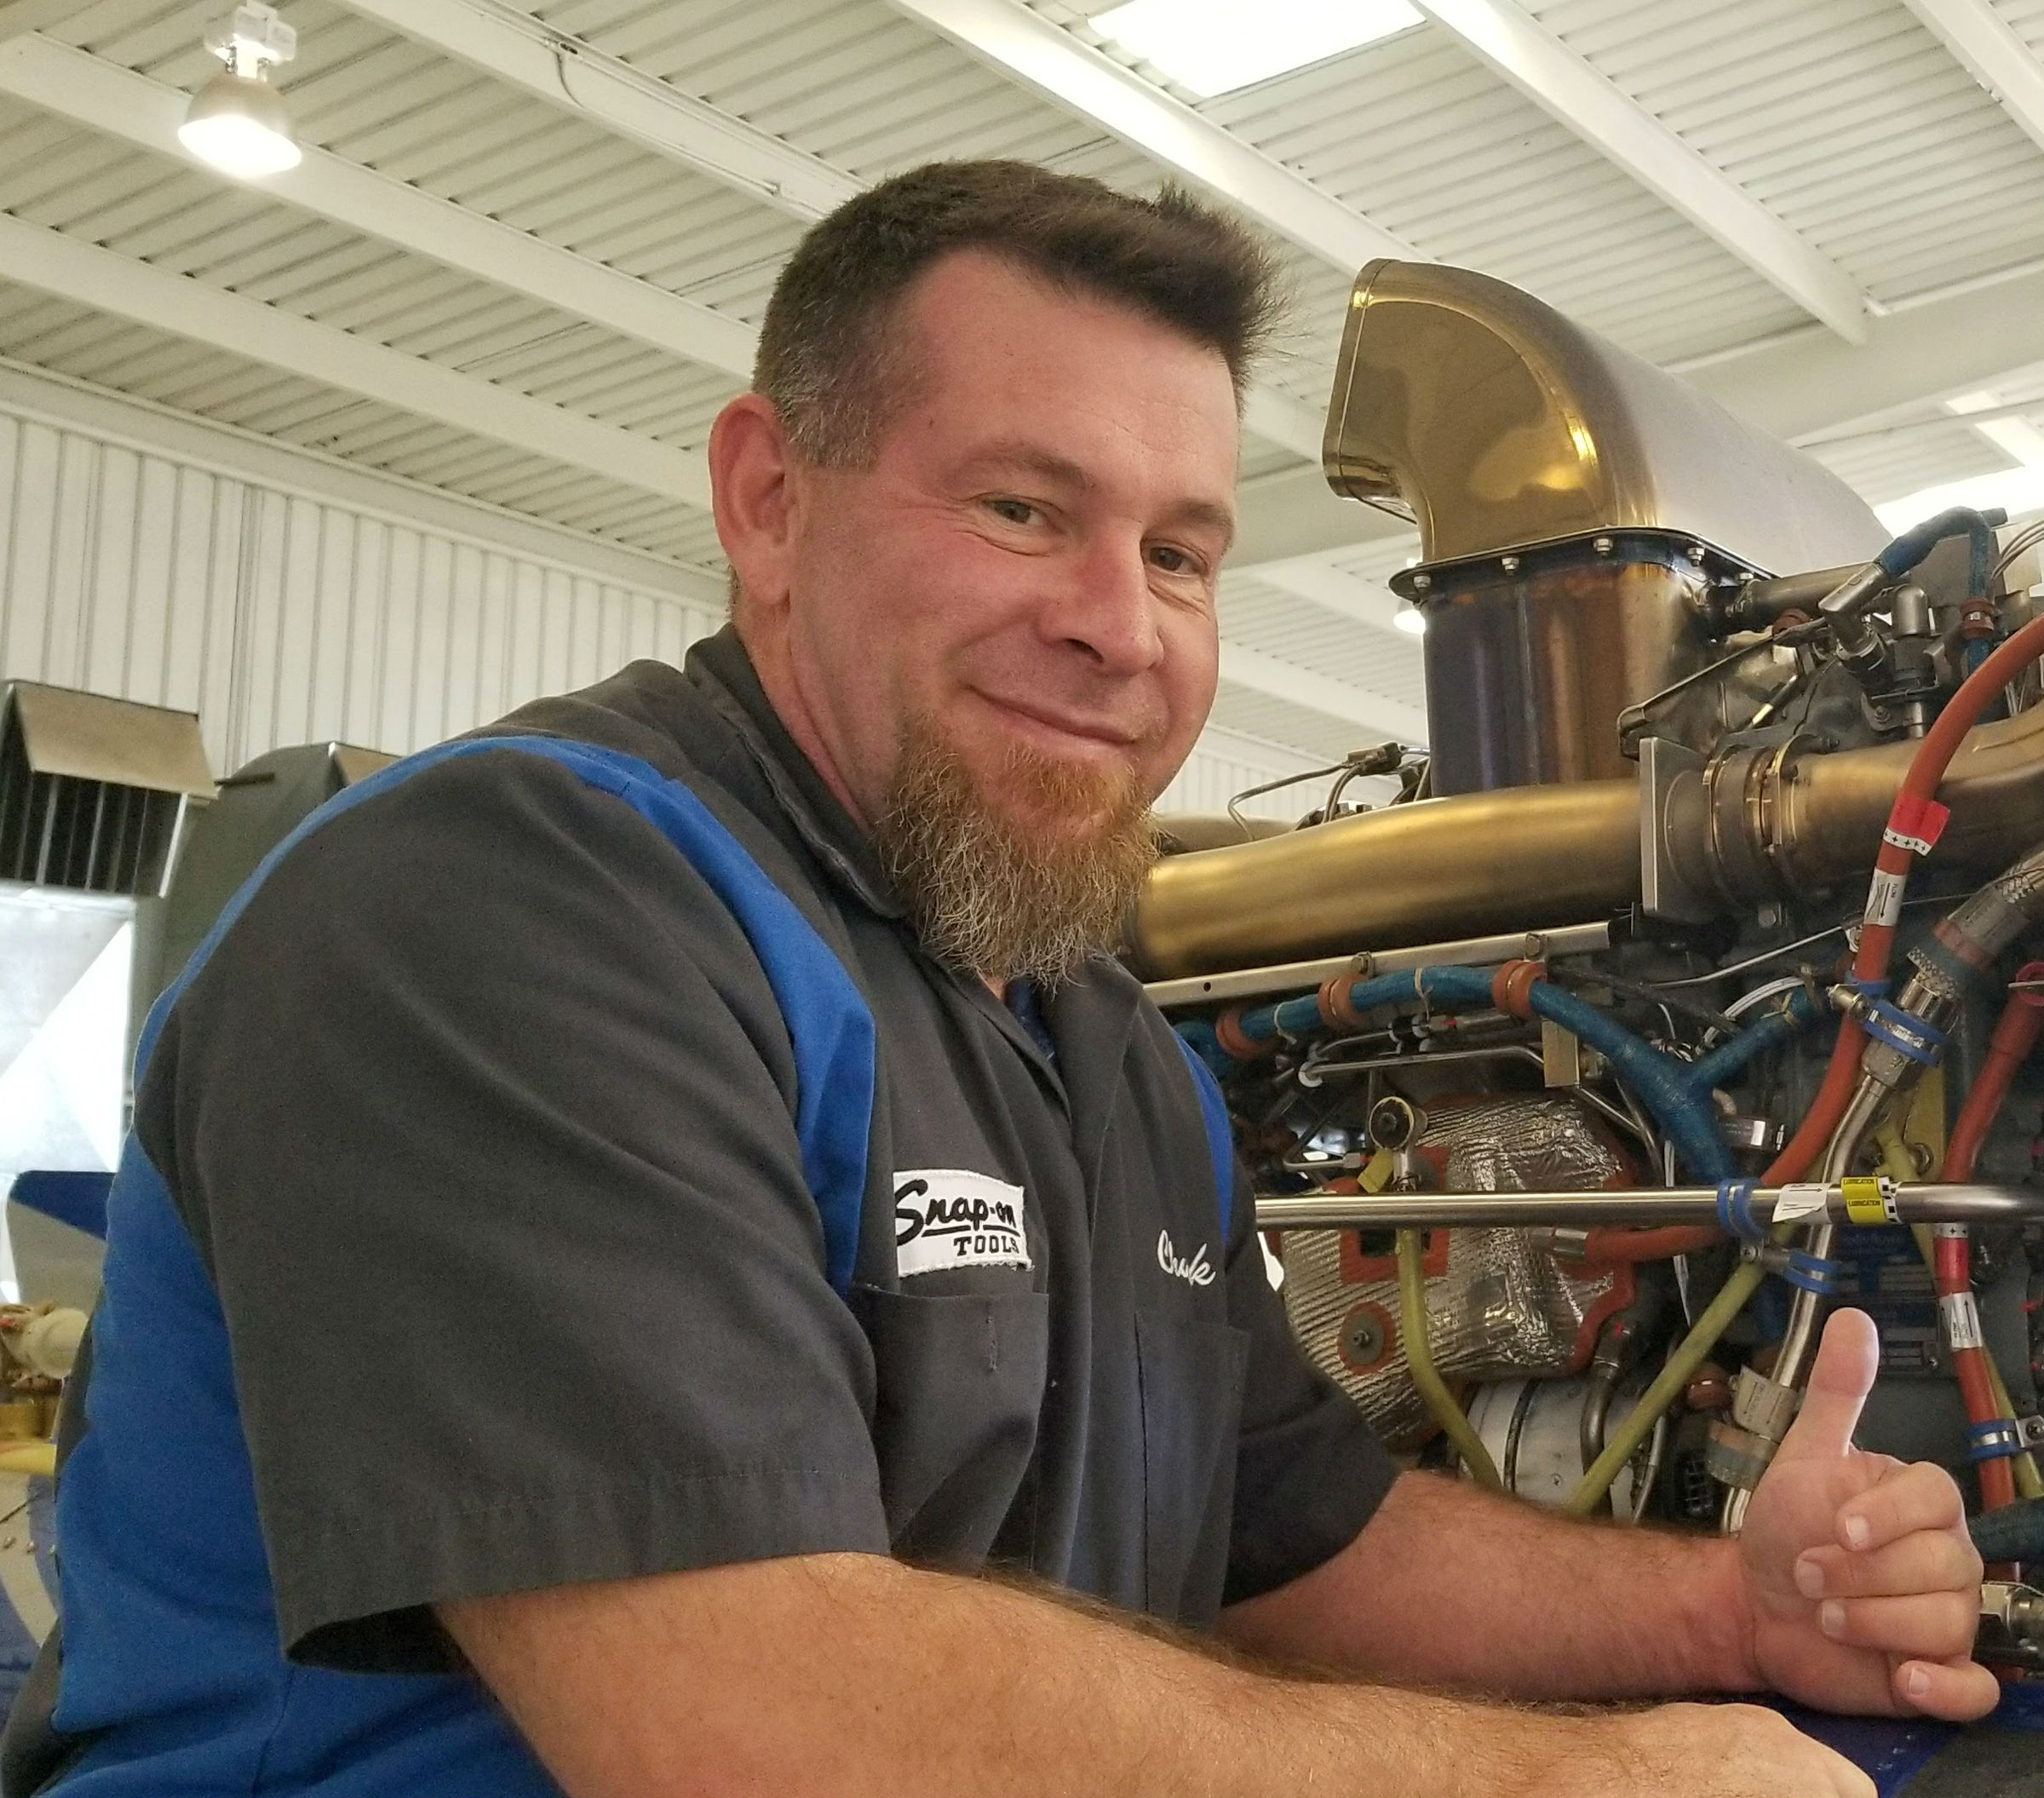 Hagen's career in helicopter maintenance began when he received his A&P license in 1992, followed by six years of service in the U.S. Army, working as a 68B10 turbine engine mechanic